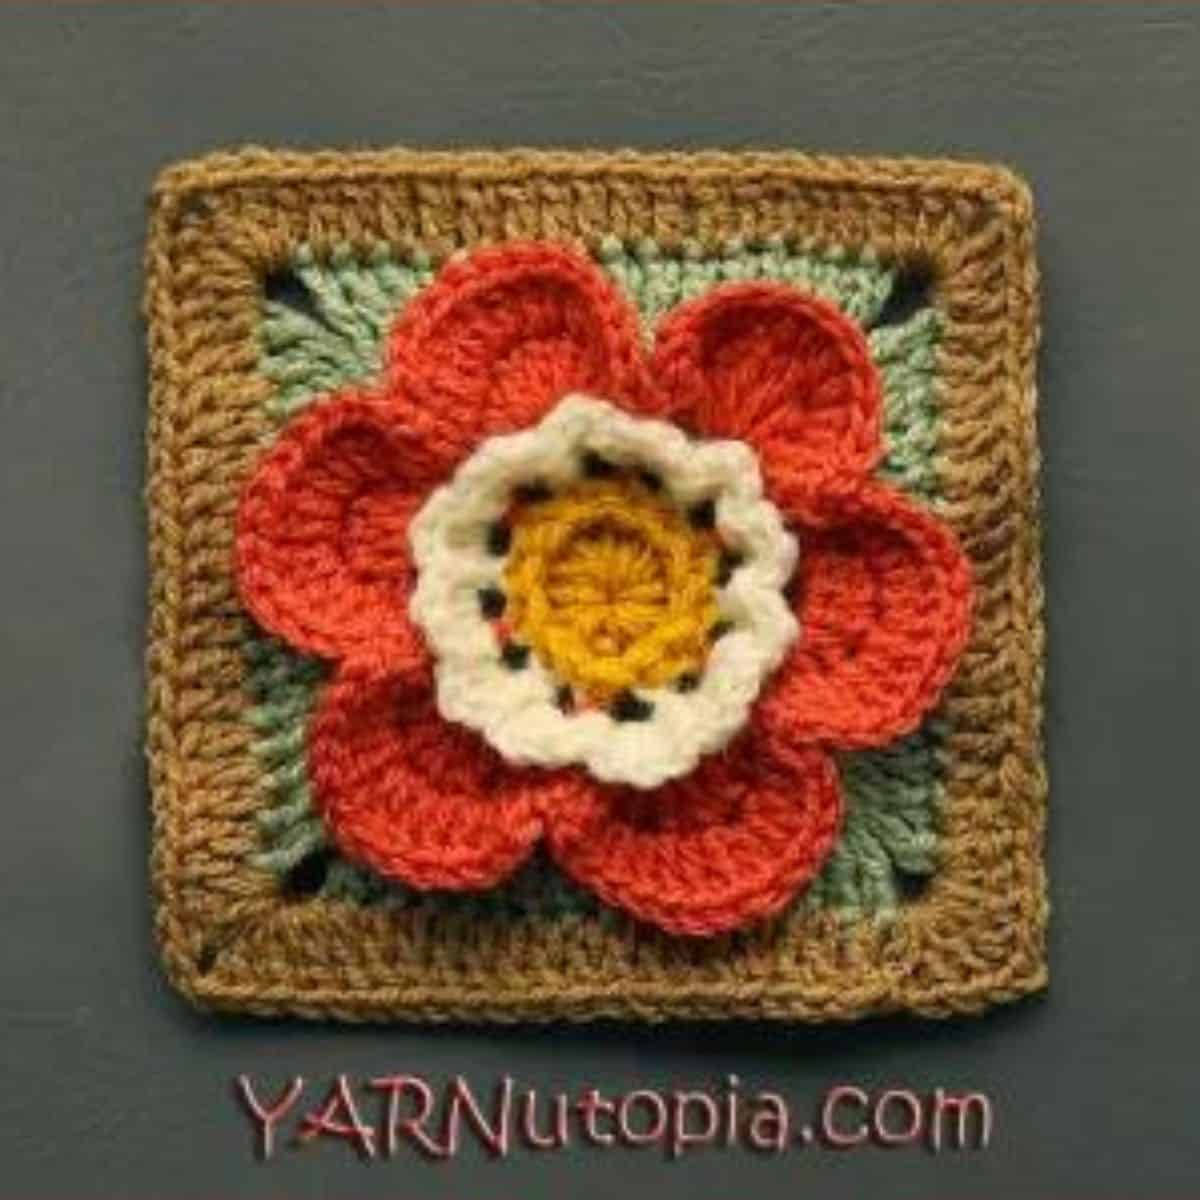 crochet granny square in fall colors with a floral motif